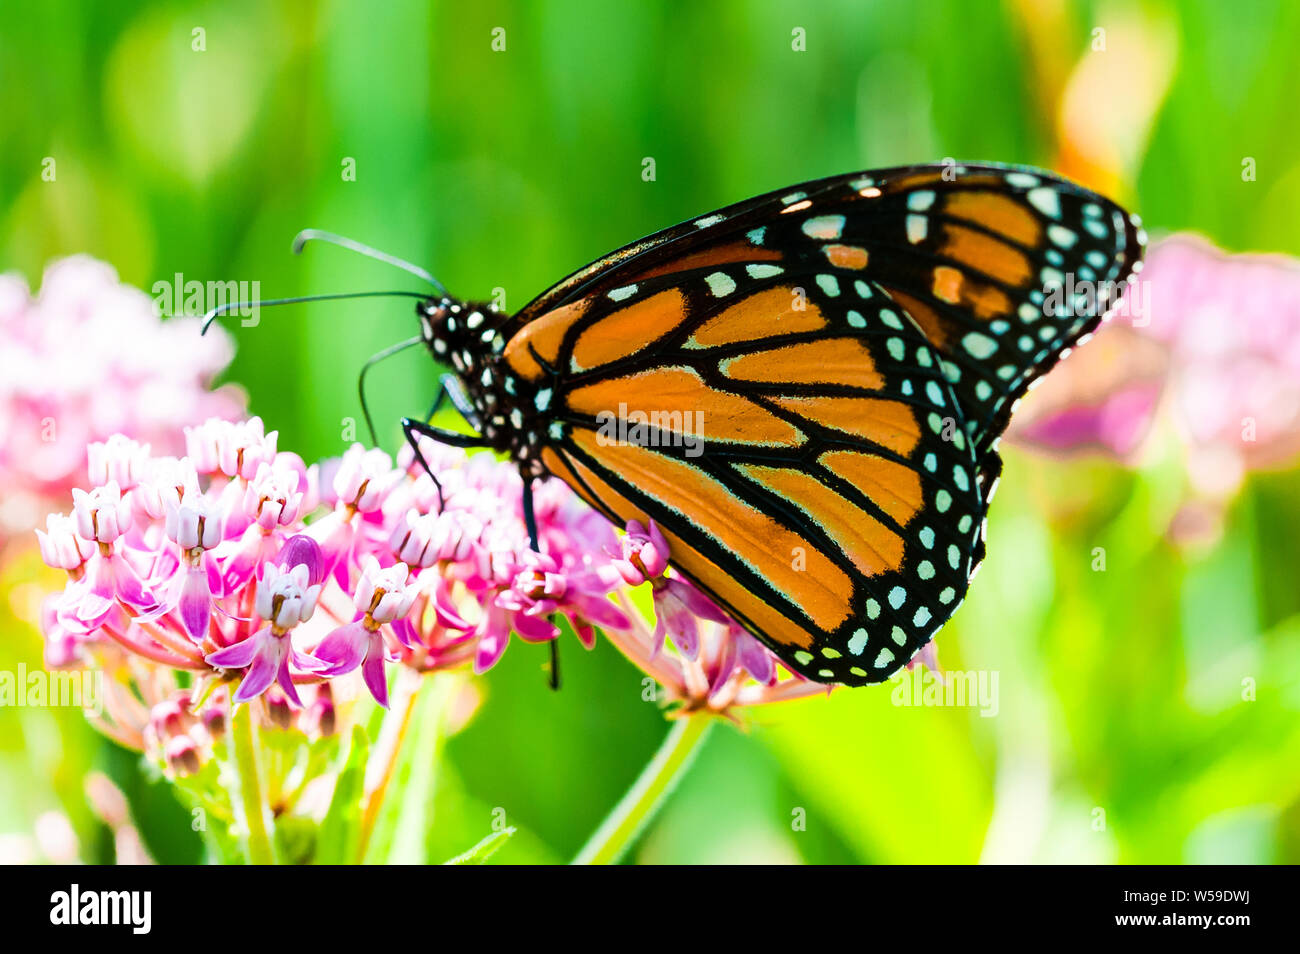 Closeup, macro shot, side-view of a Monarch butterfly collecting pollen from pink flowers. Stock Photo